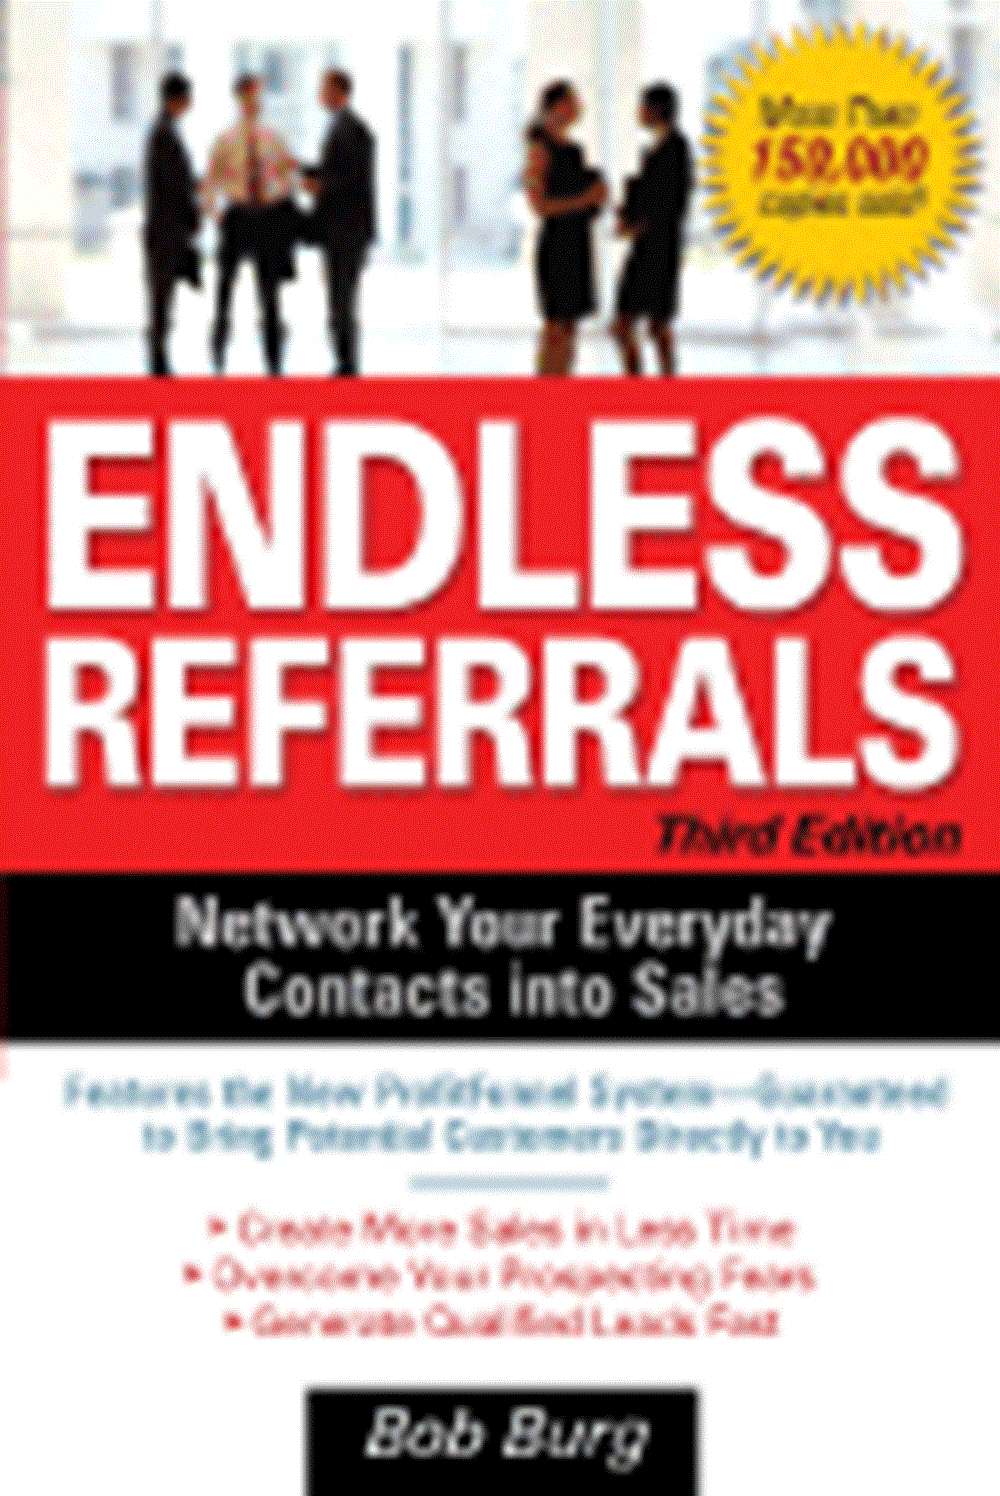 Endless Referrals Network Your Everyday Contacts Into Sales